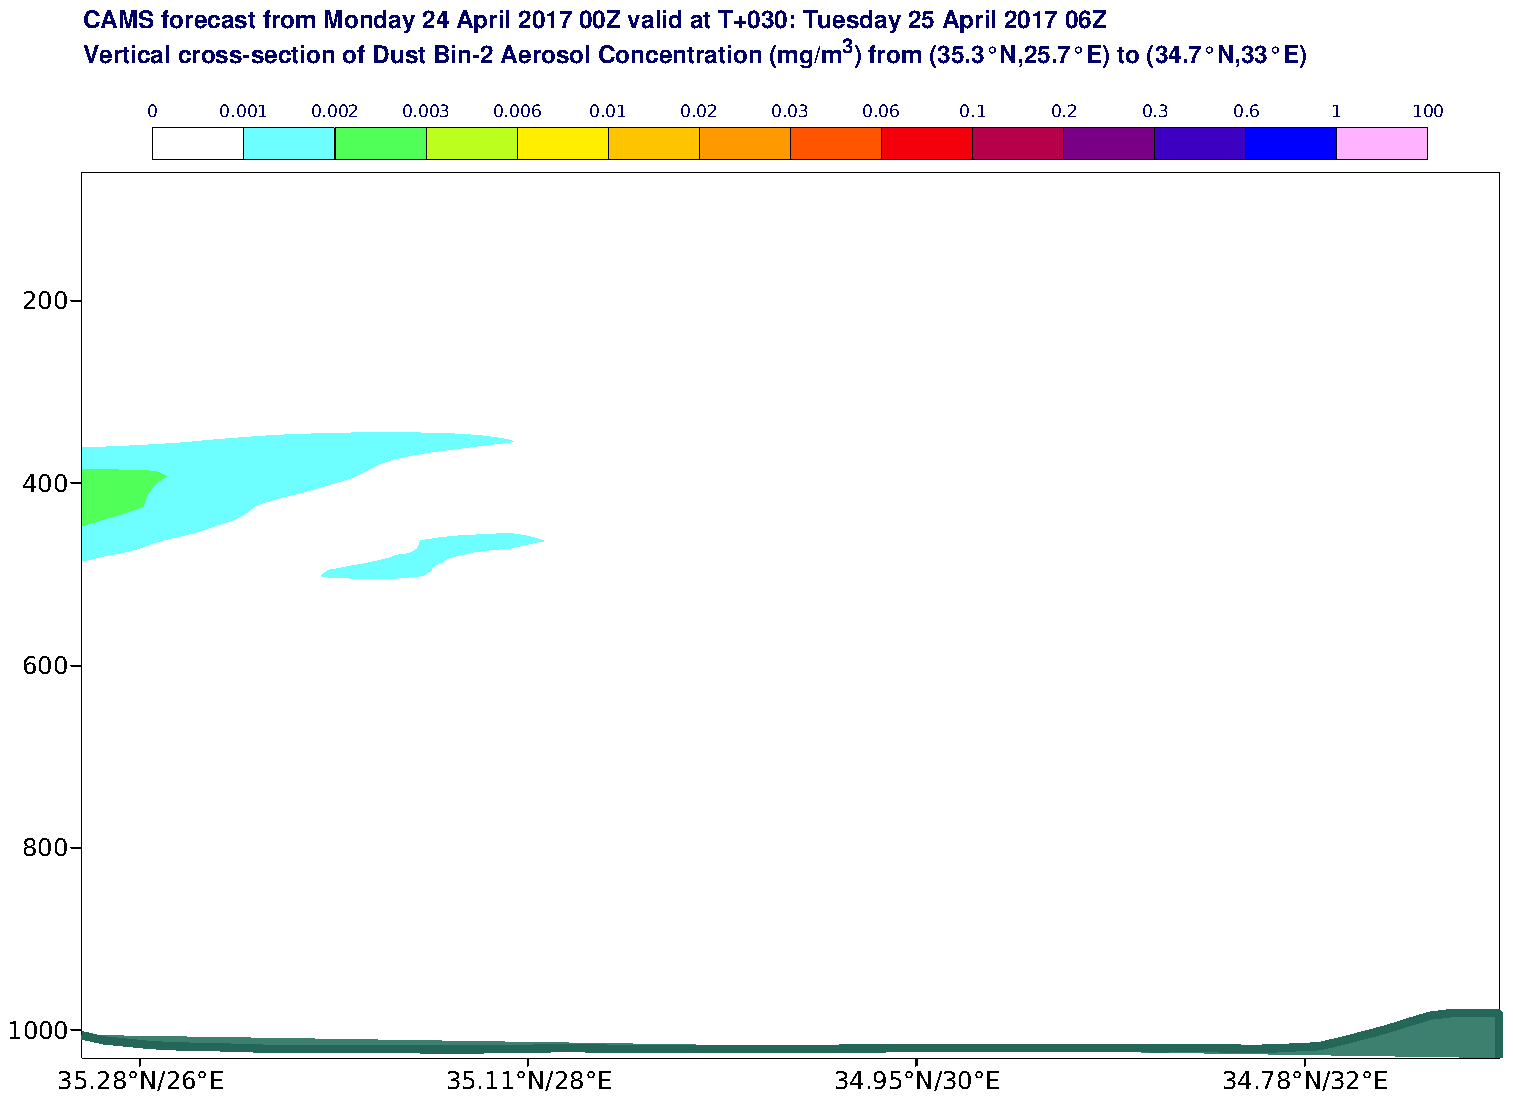 Vertical cross-section of Dust Bin-2 Aerosol Concentration (mg/m3) valid at T30 - 2017-04-25 06:00